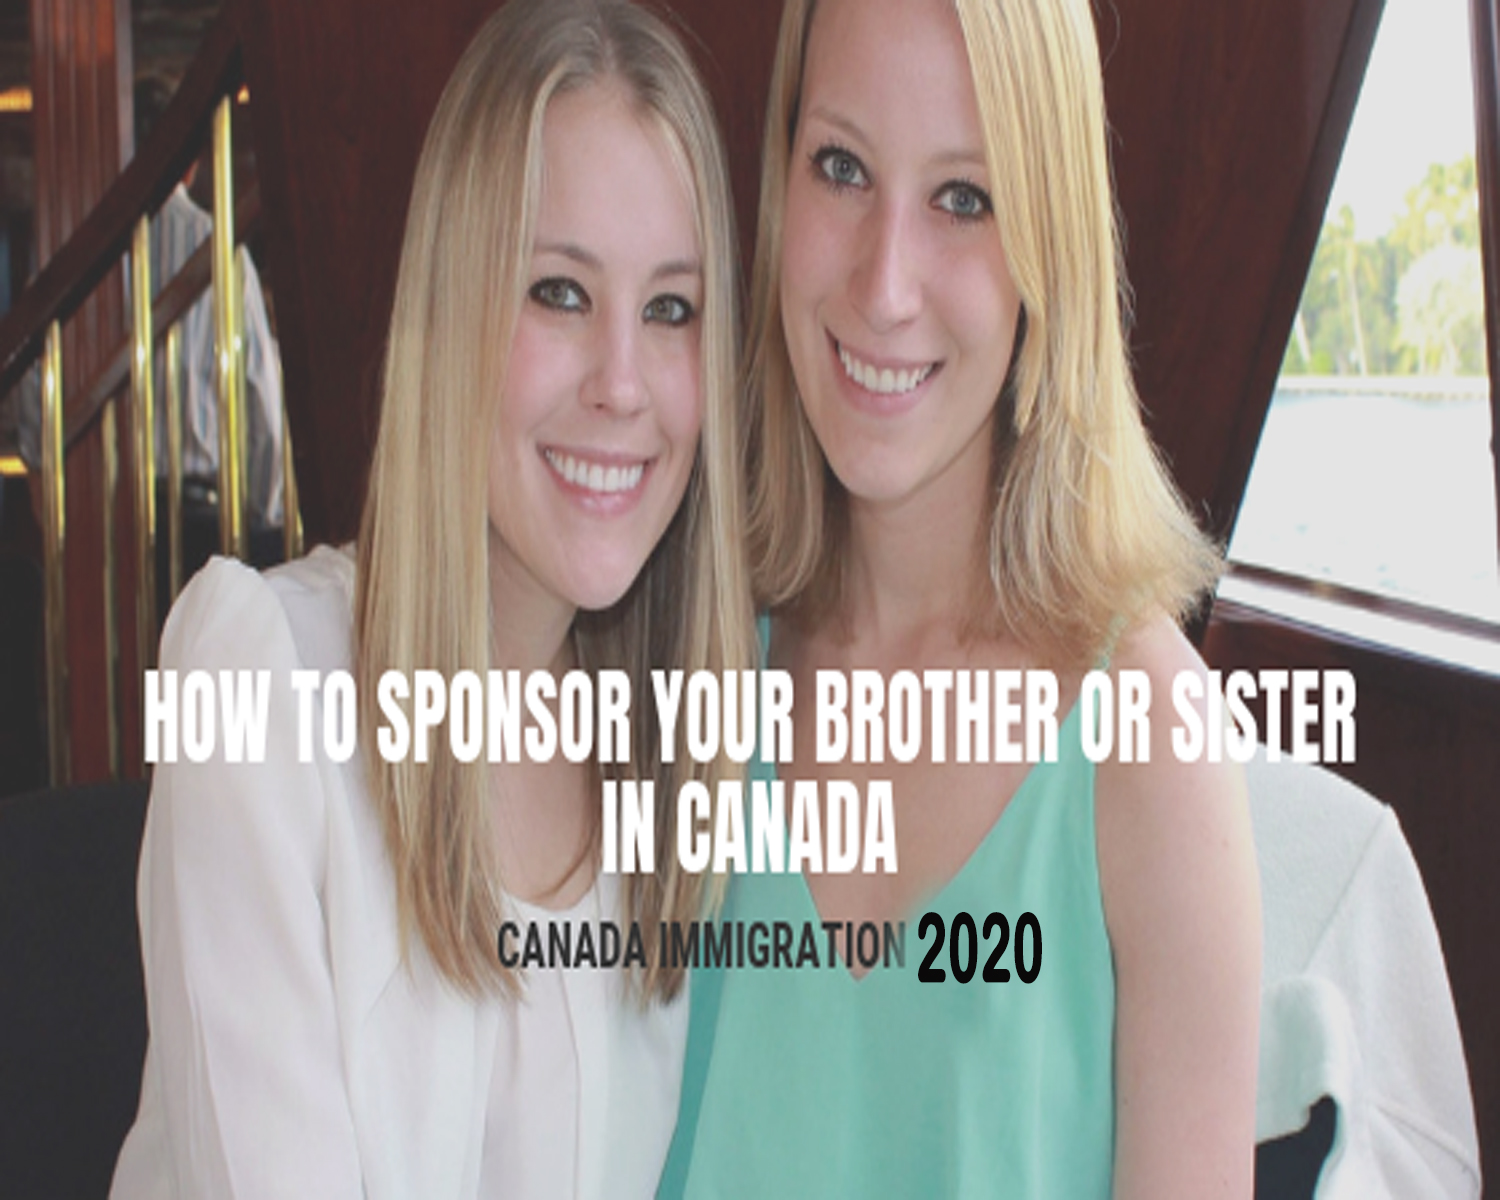 Process of sponsoring Siblings to Canada by A Canadian Permanent Resident Who is not yet a citizen)